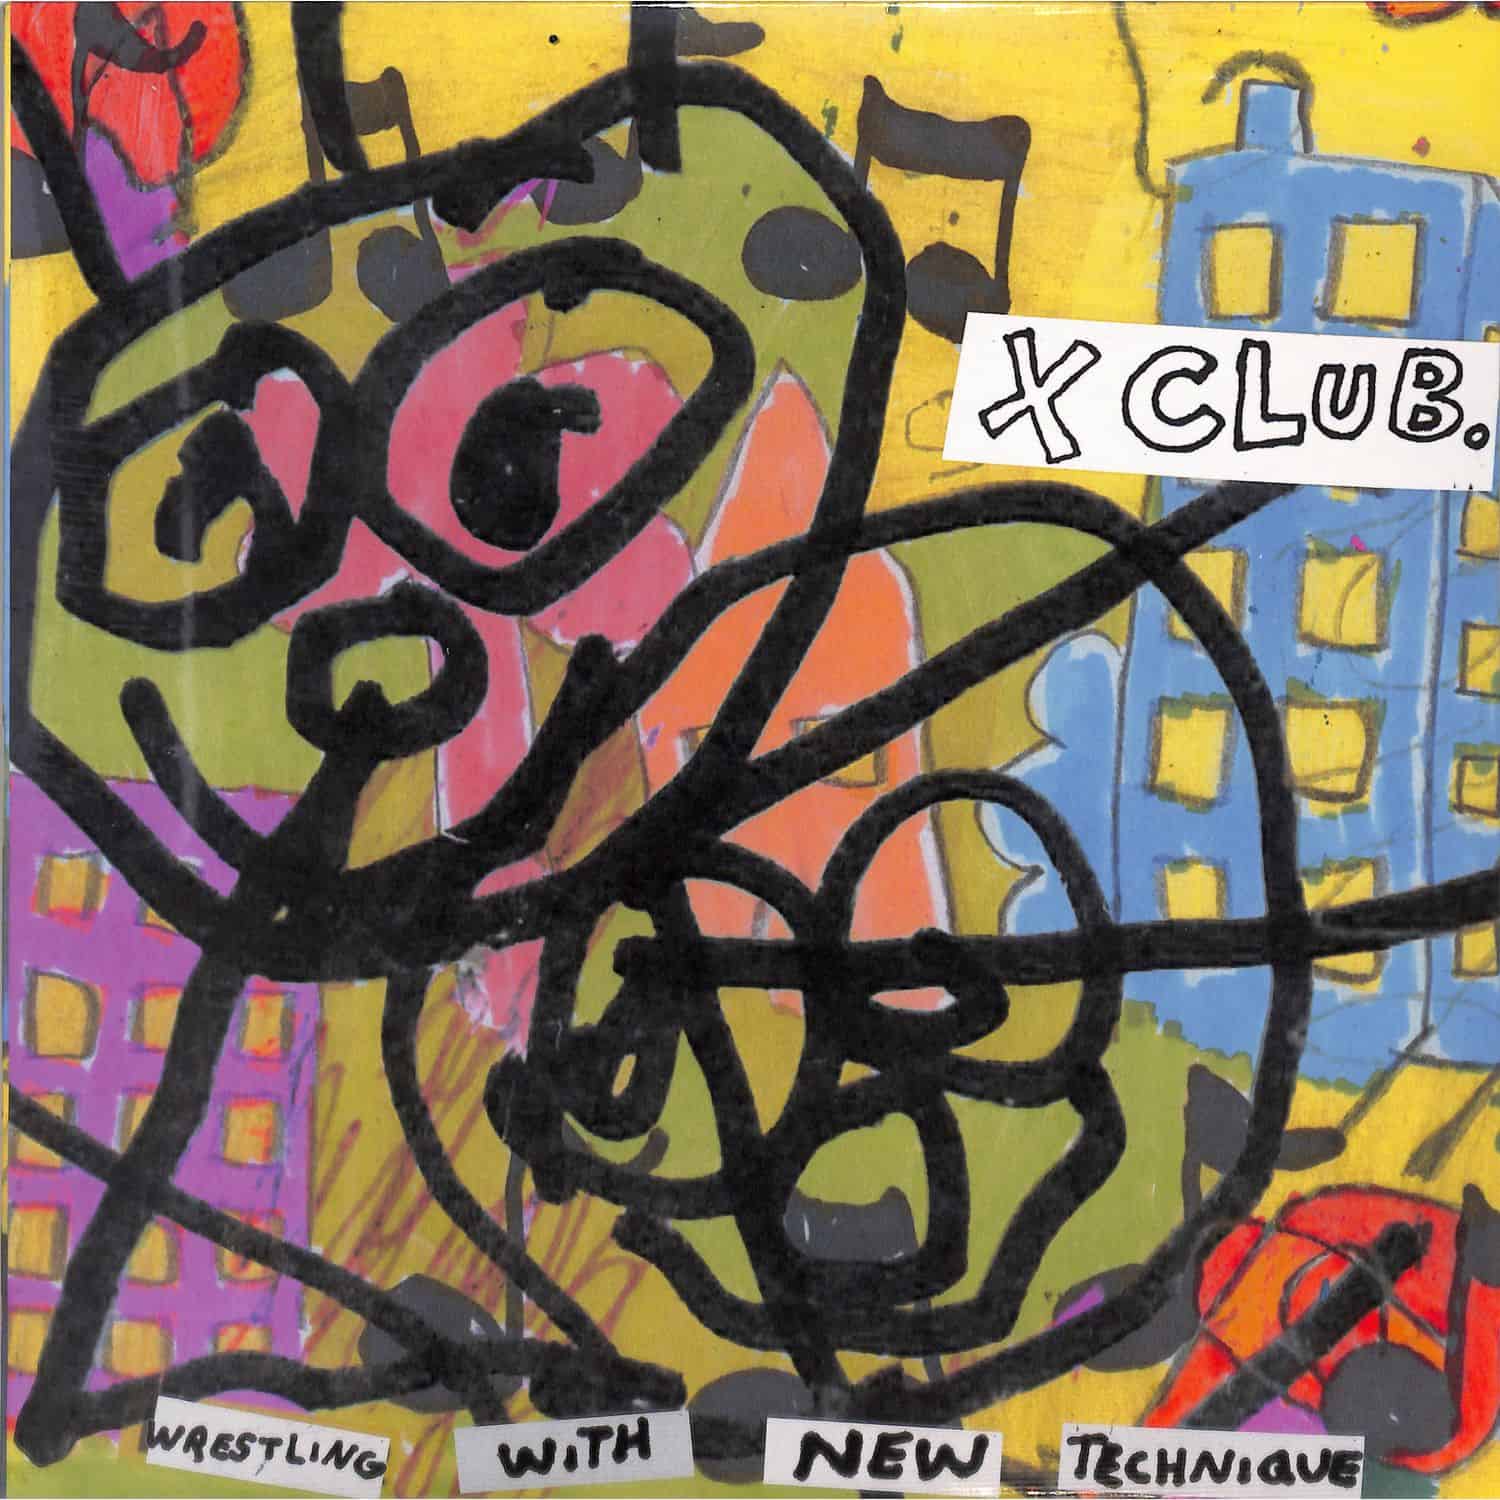 X CLUB. - WRESTLING WITH NEW TECHNIQUE